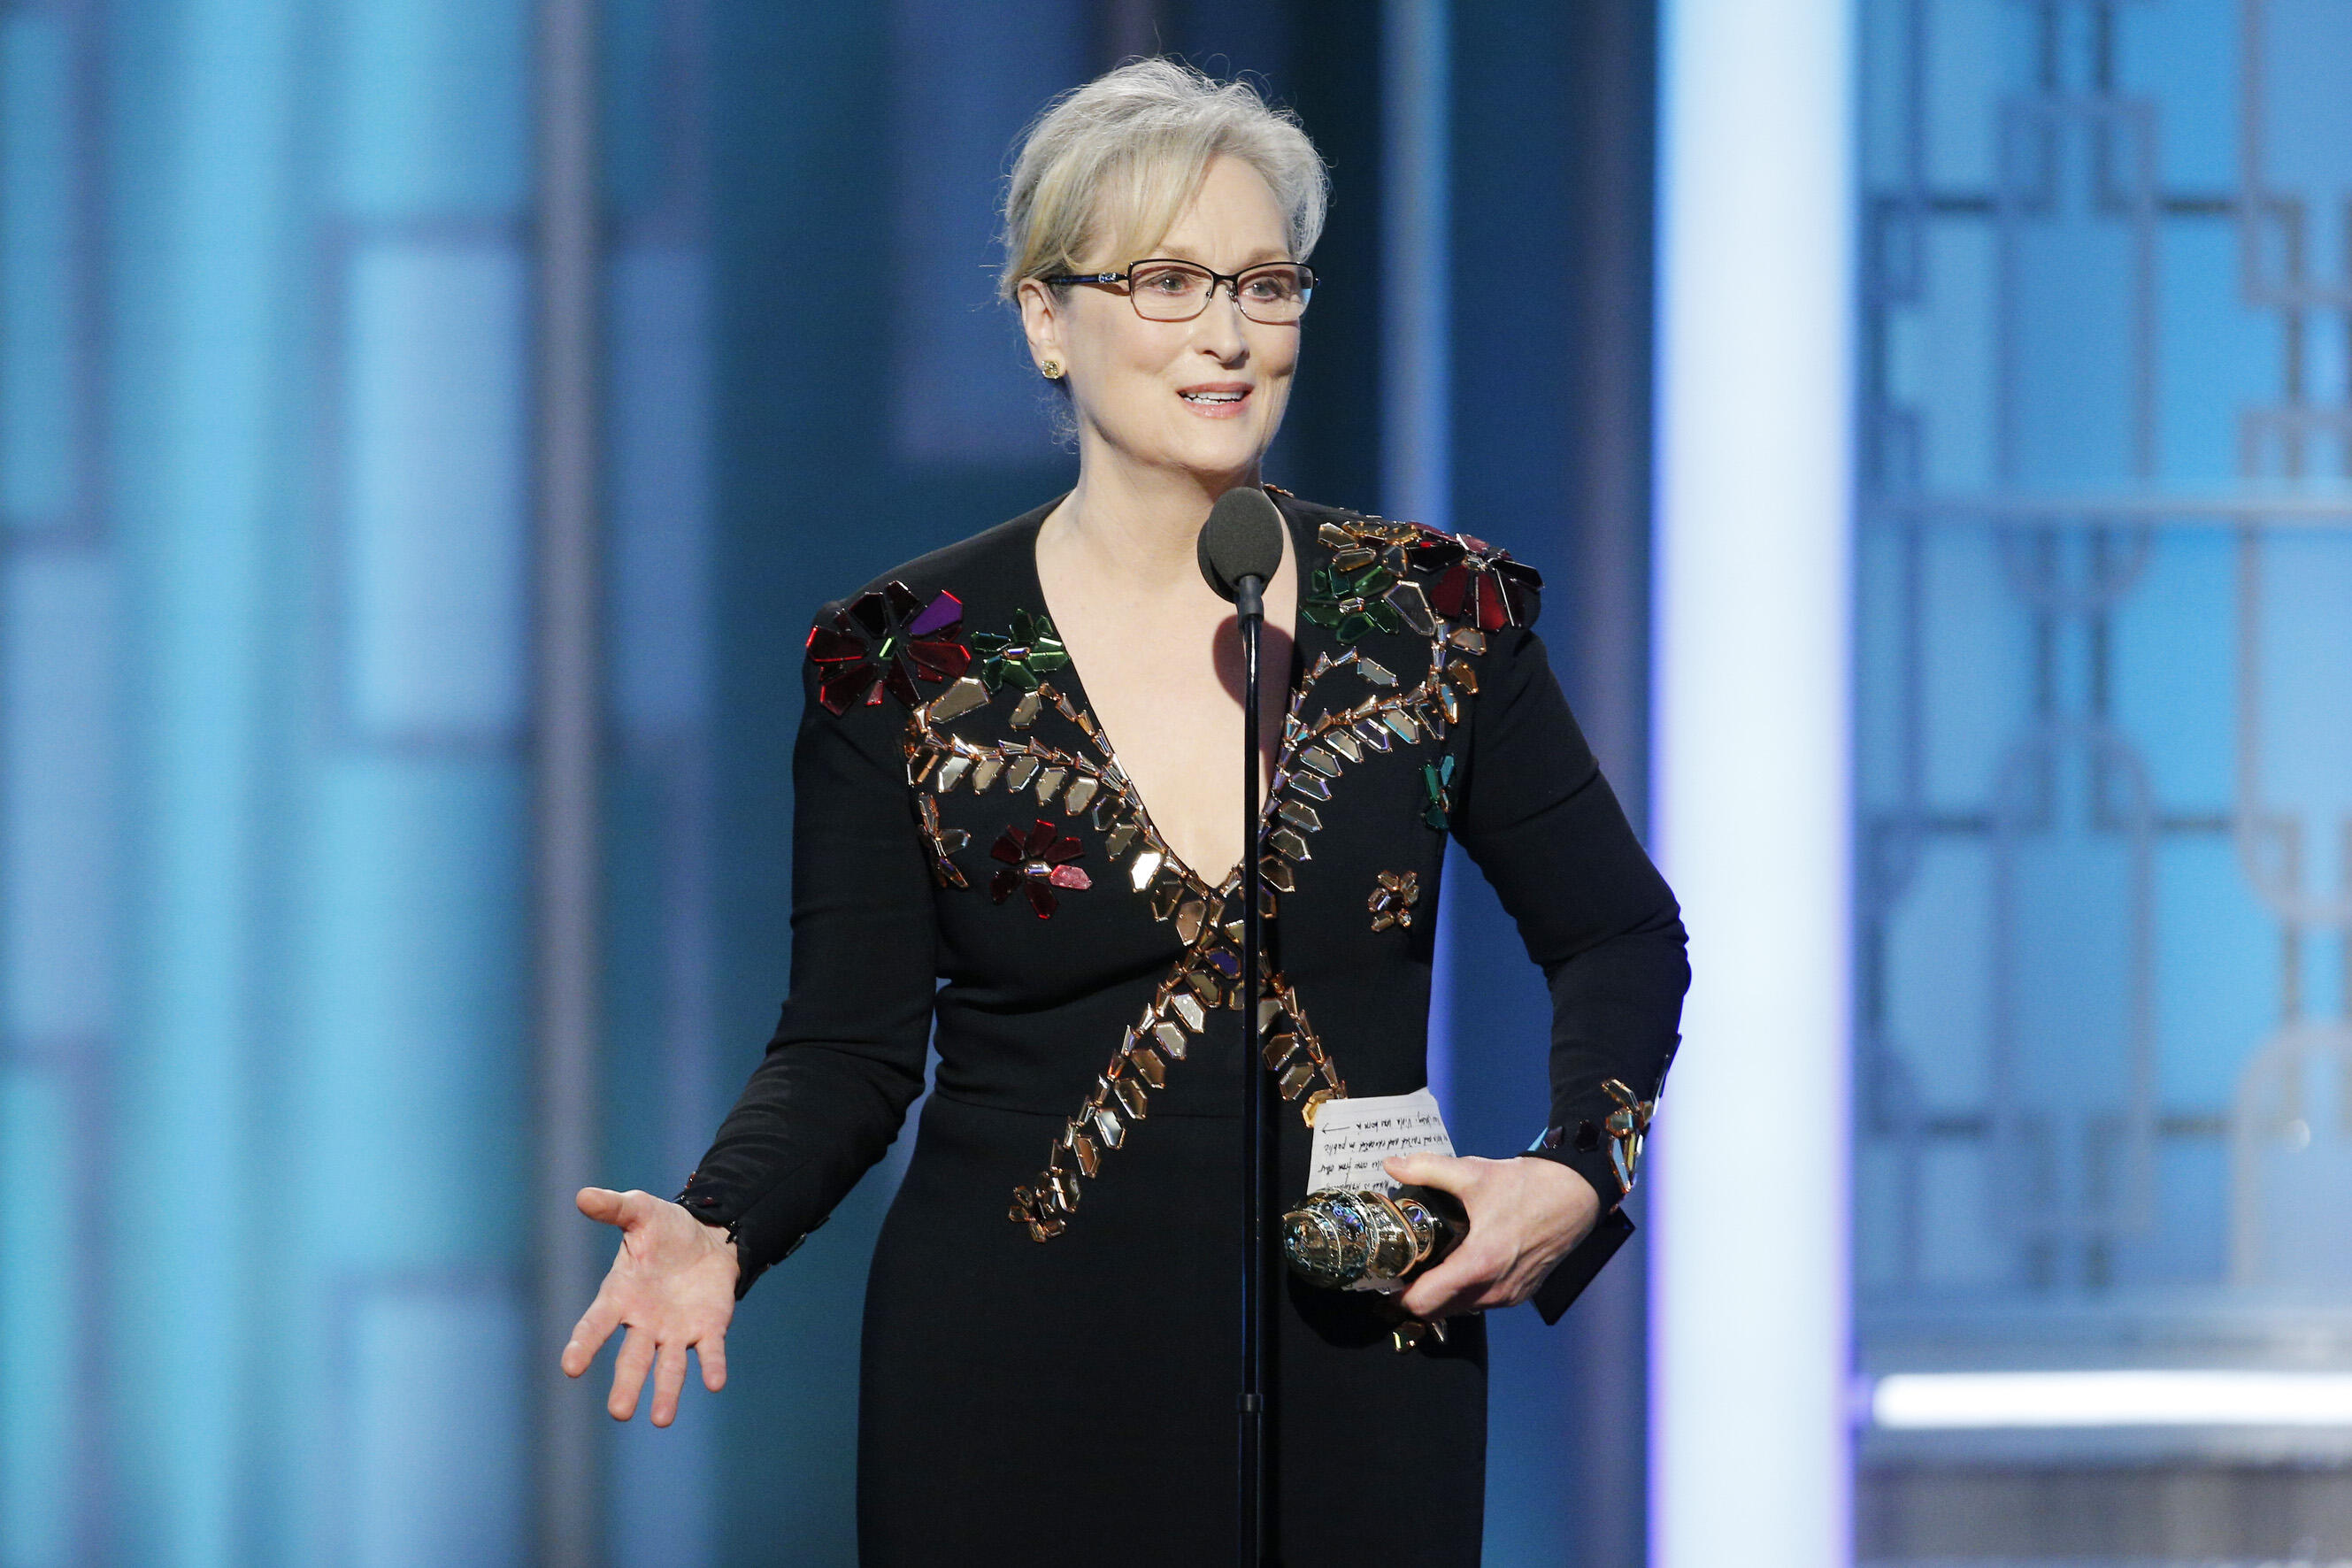 BEVERLY HILLS, CA - JANUARY 08: In this handout photo provided by NBCUniversal, Meryl Streep accepts  Cecil B. DeMille Award  during the 74th Annual Golden Globe Awards at The Beverly Hilton Hotel on January 8, 2017 in Beverly Hills, California. (Photo by